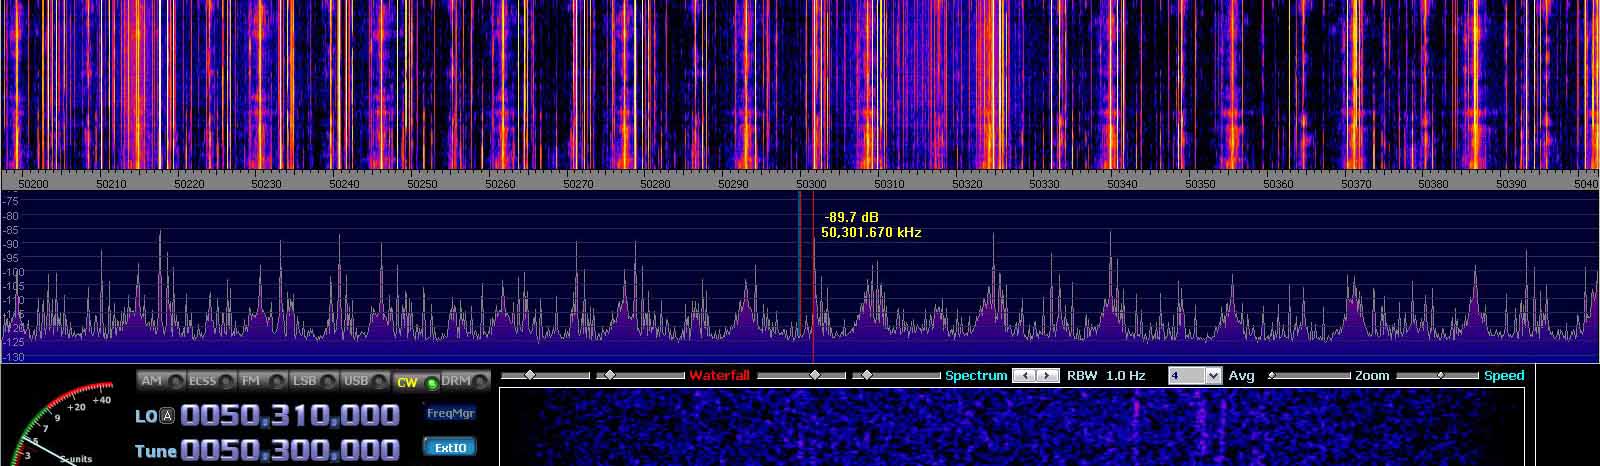 2014-07-04 50.300 MHz +- 100 kHz - Strong Es - 4-el dipole array with ends to St P - (c) OH7HJ.JPG